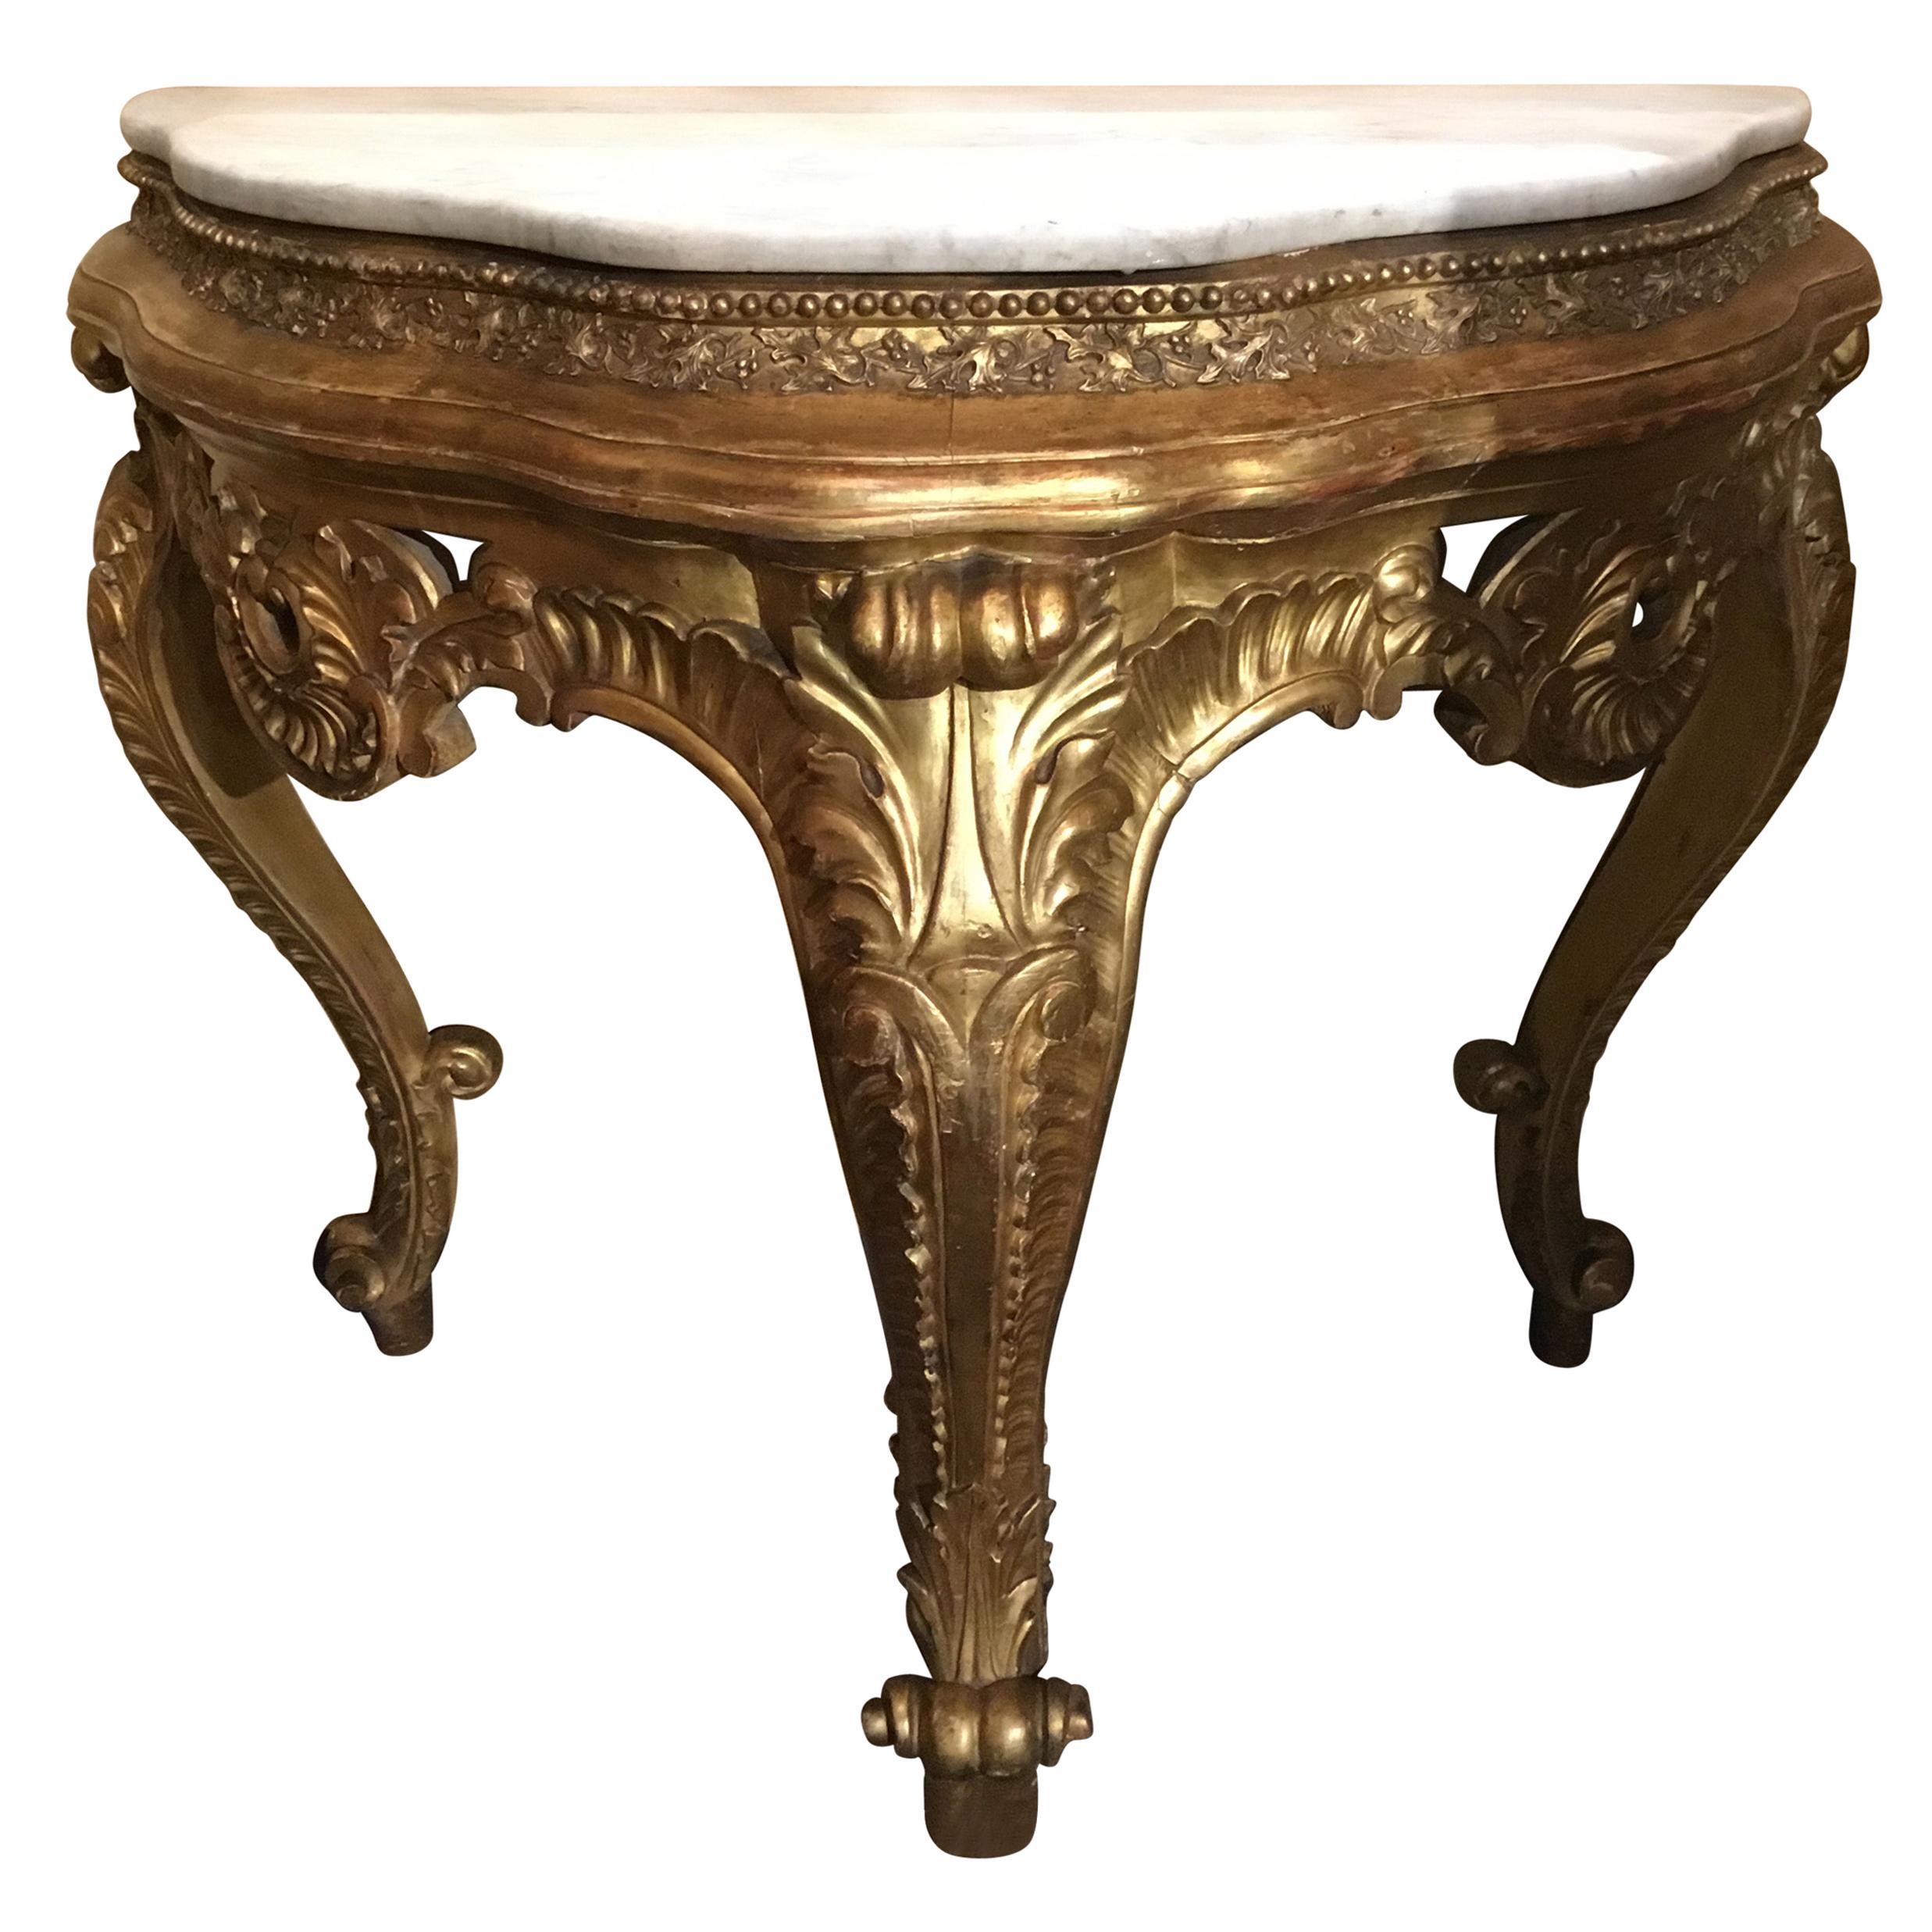 French Giltwood Console in Demilune Form 19th Century White Marble Top